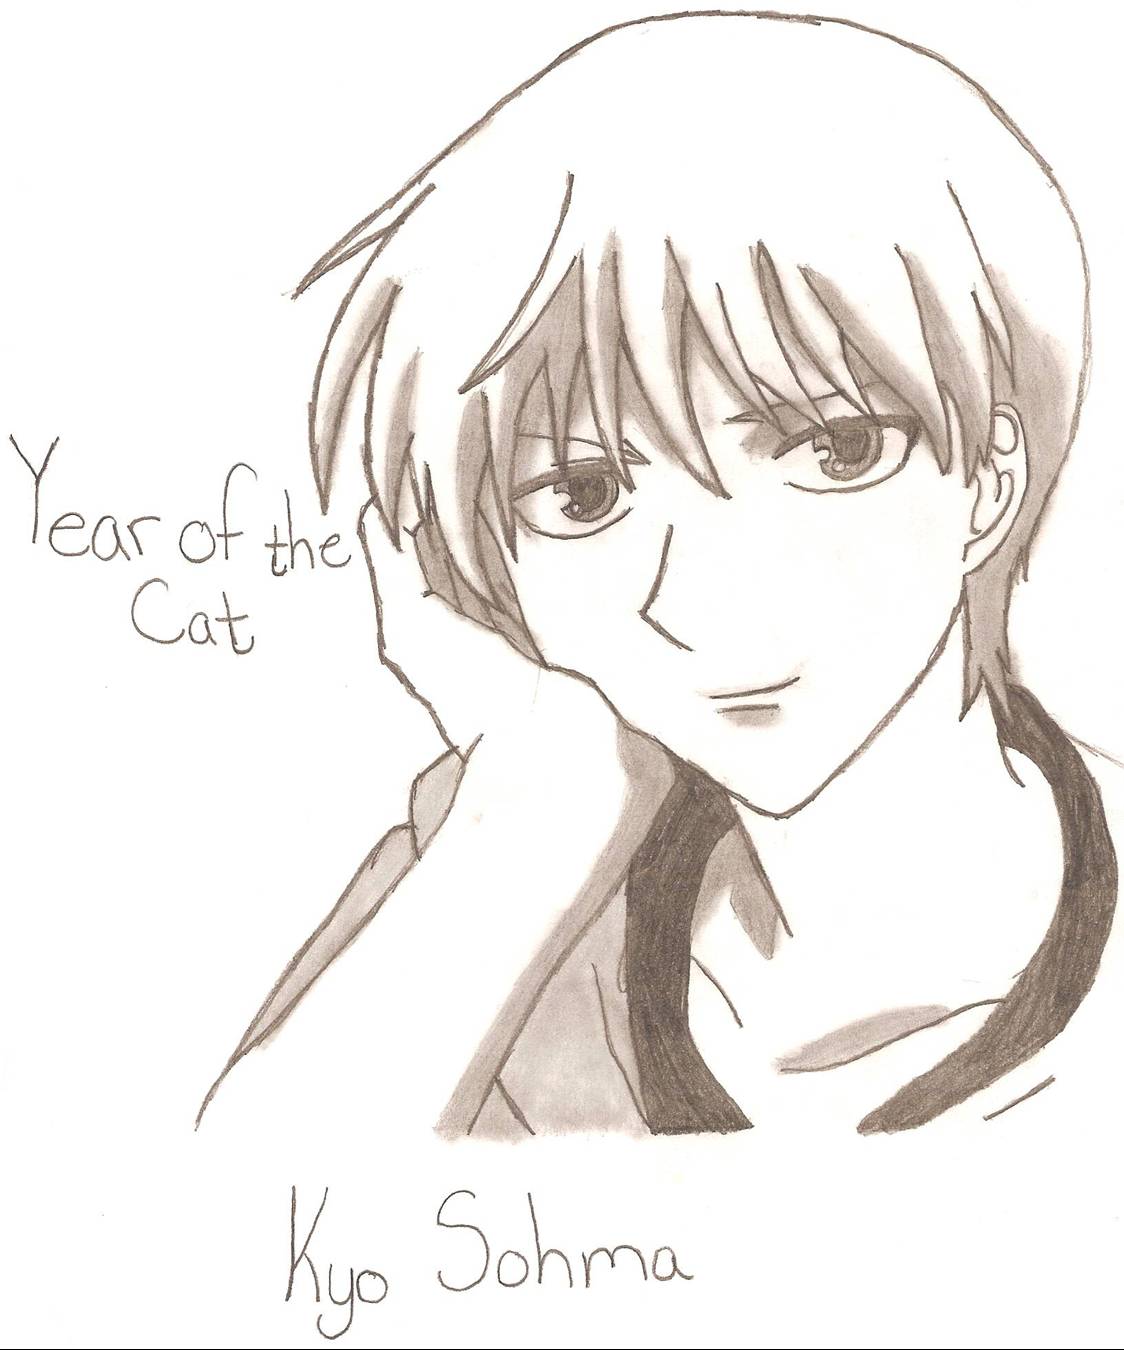 Kyo Sohma Year of the Cat by Marc_of_Art